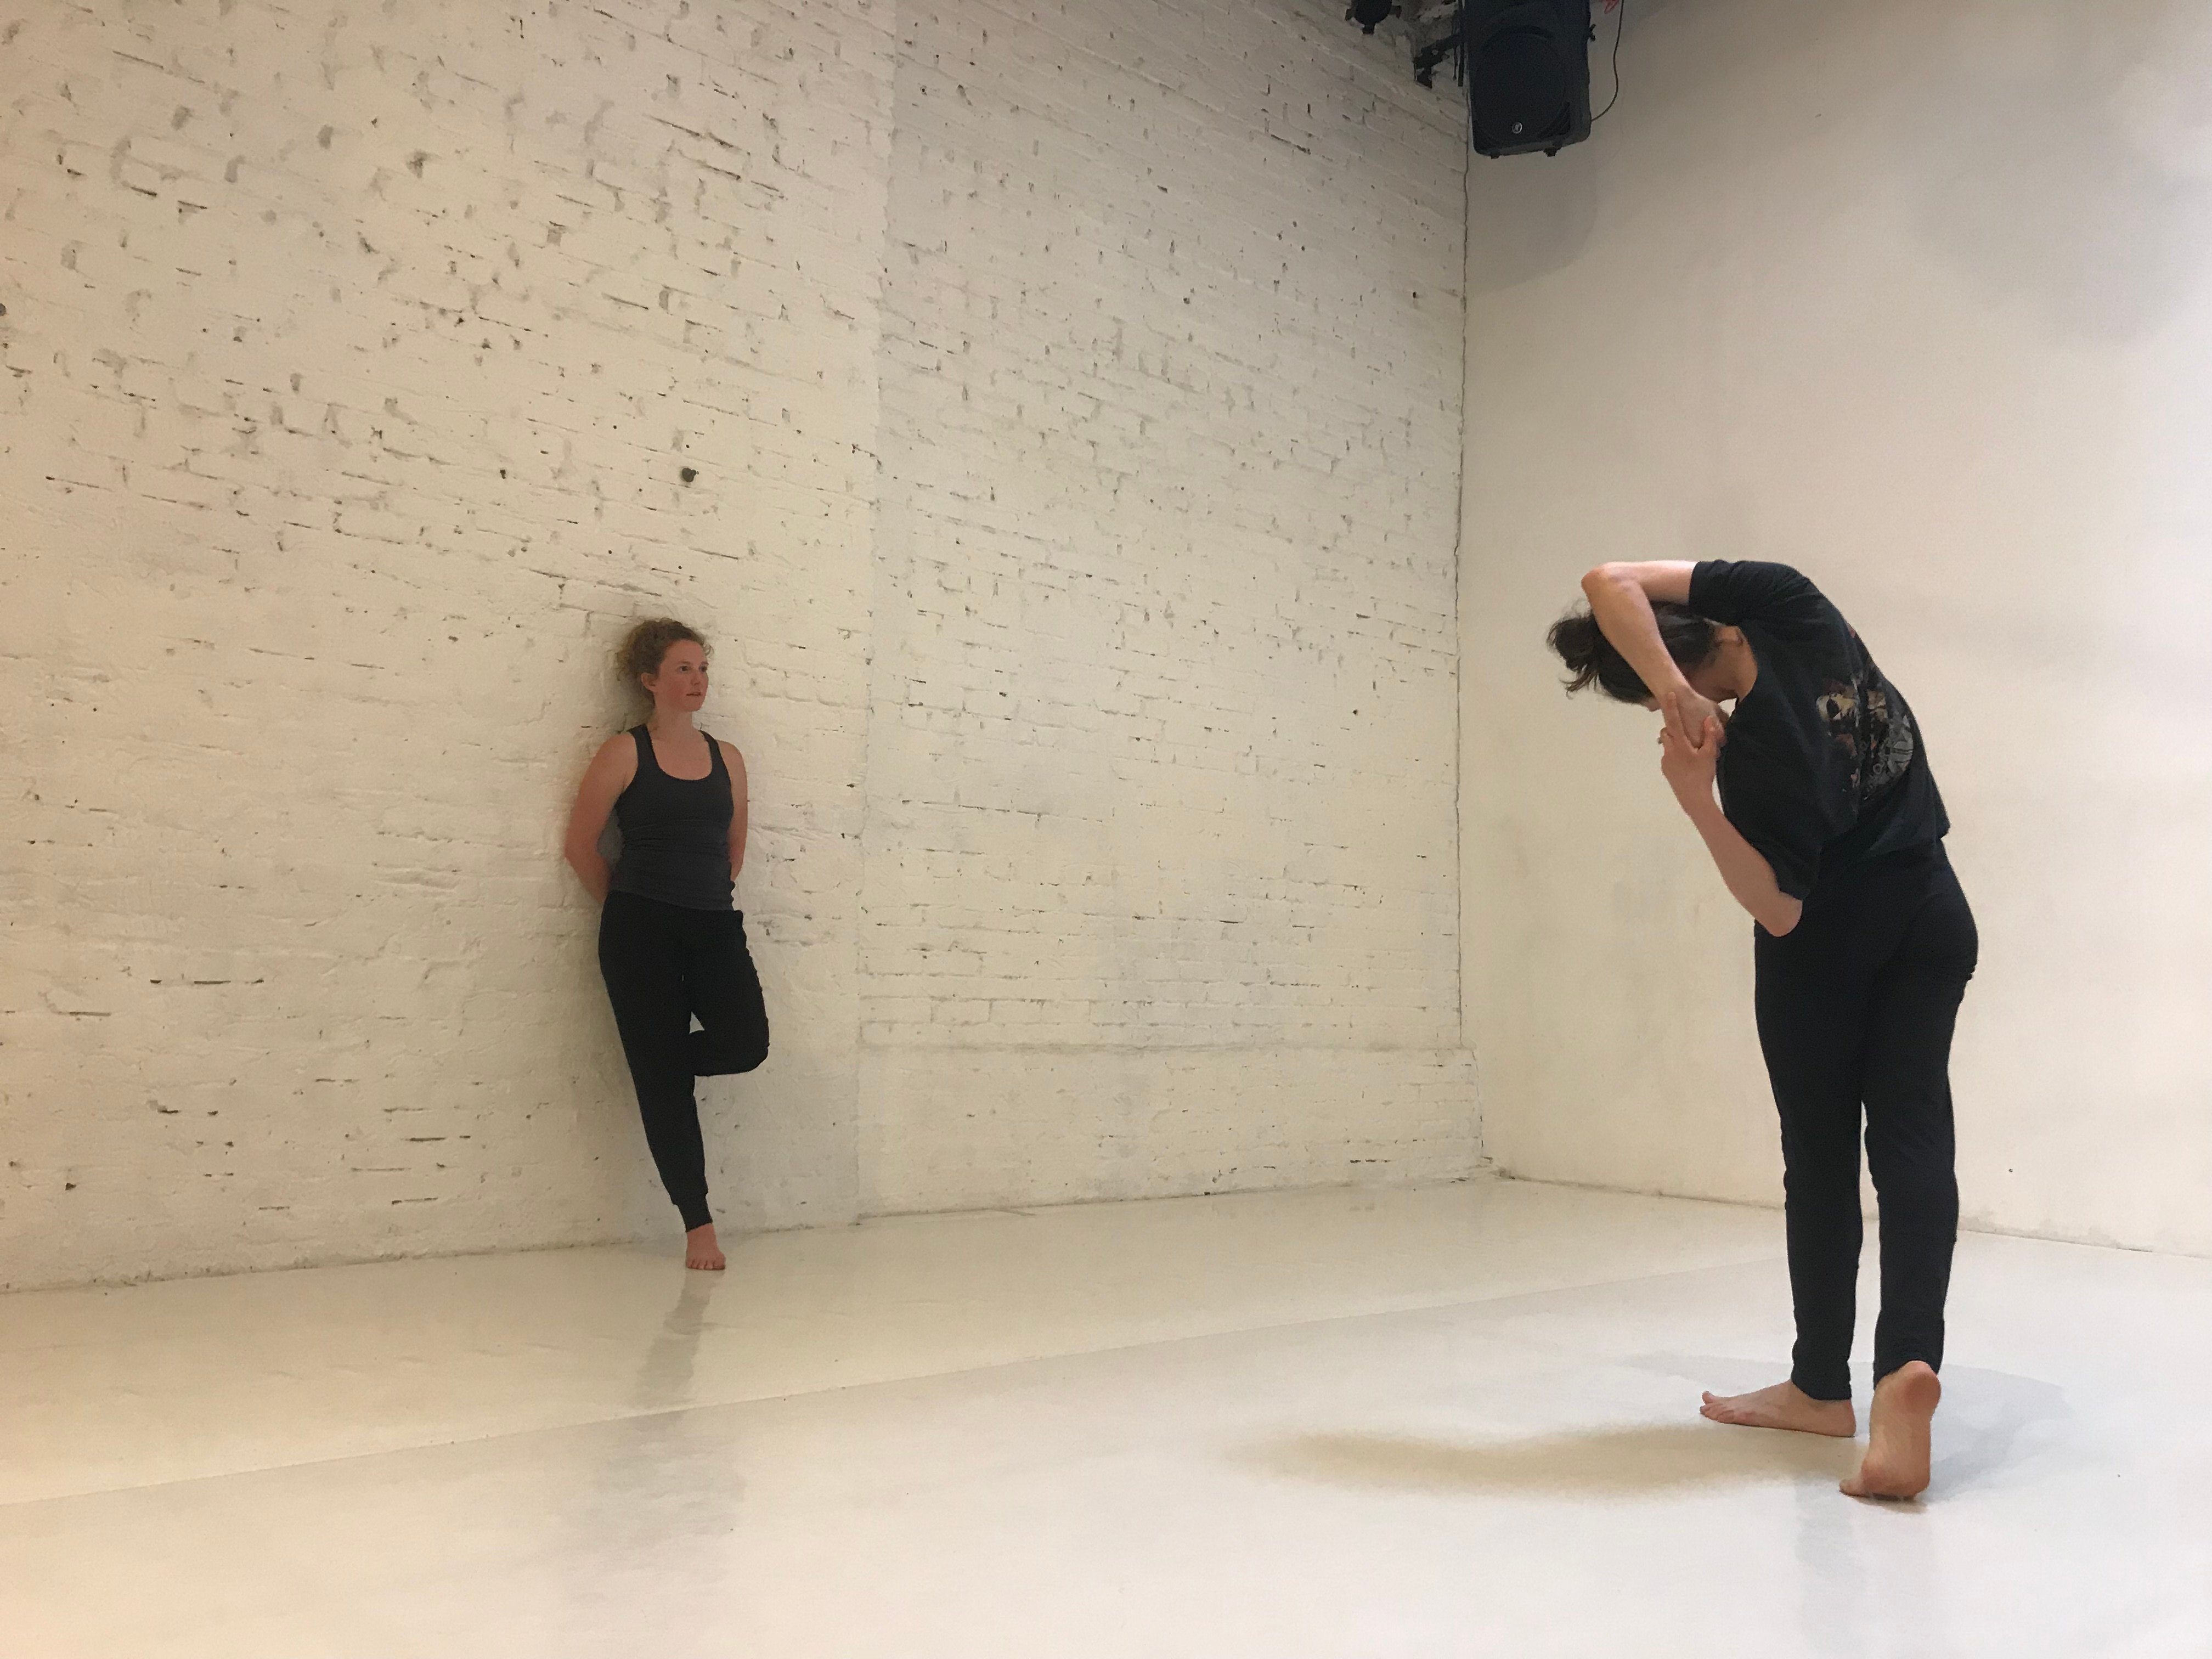 Kelly Todd leans against a wall in a dance studio with another dancer stretching across from her